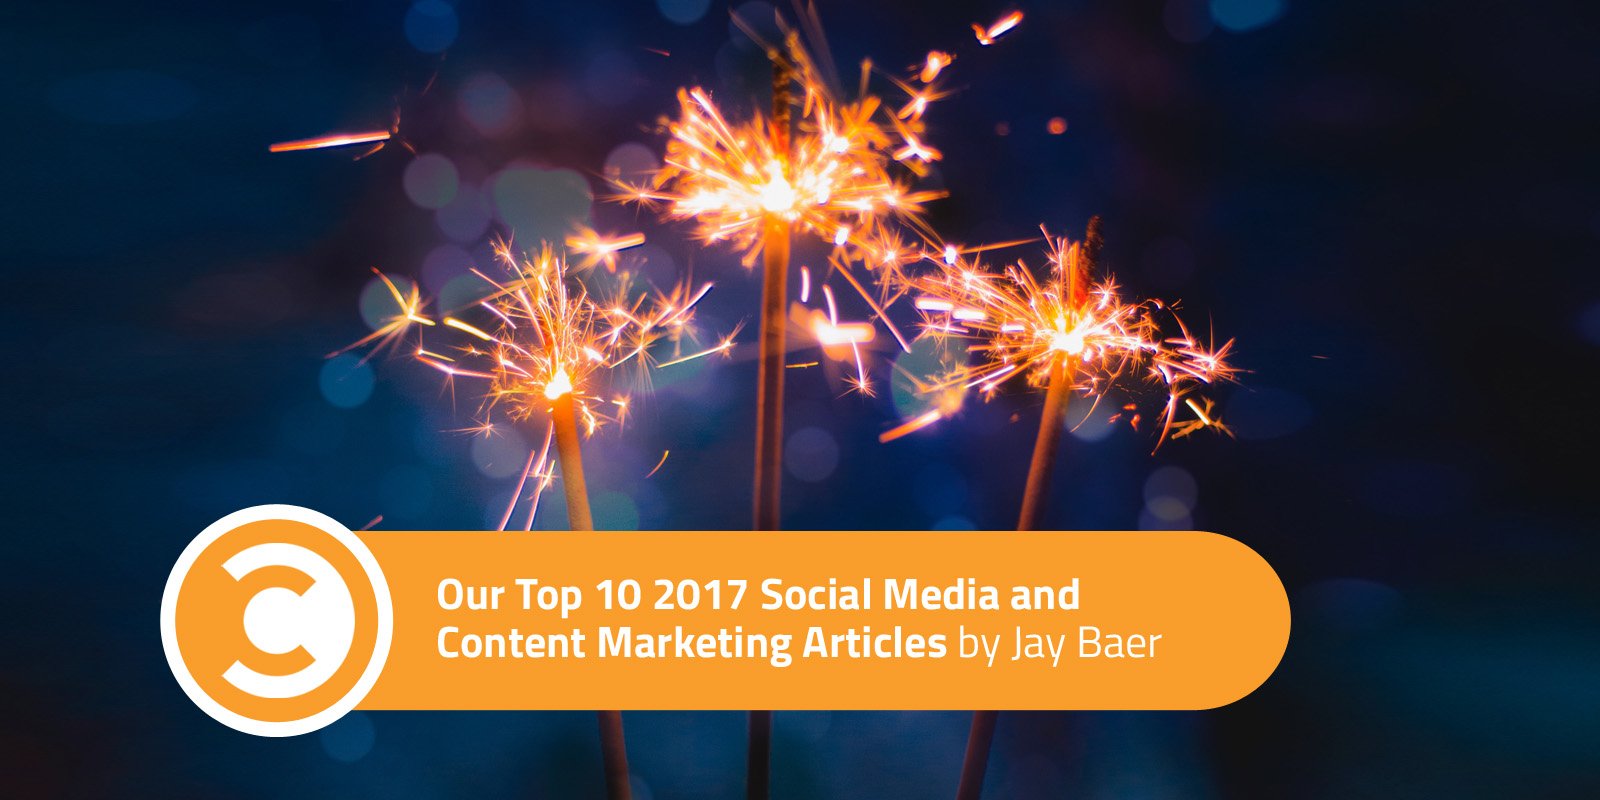 Our Top 10 2017 Social Media and Content Marketing Articles